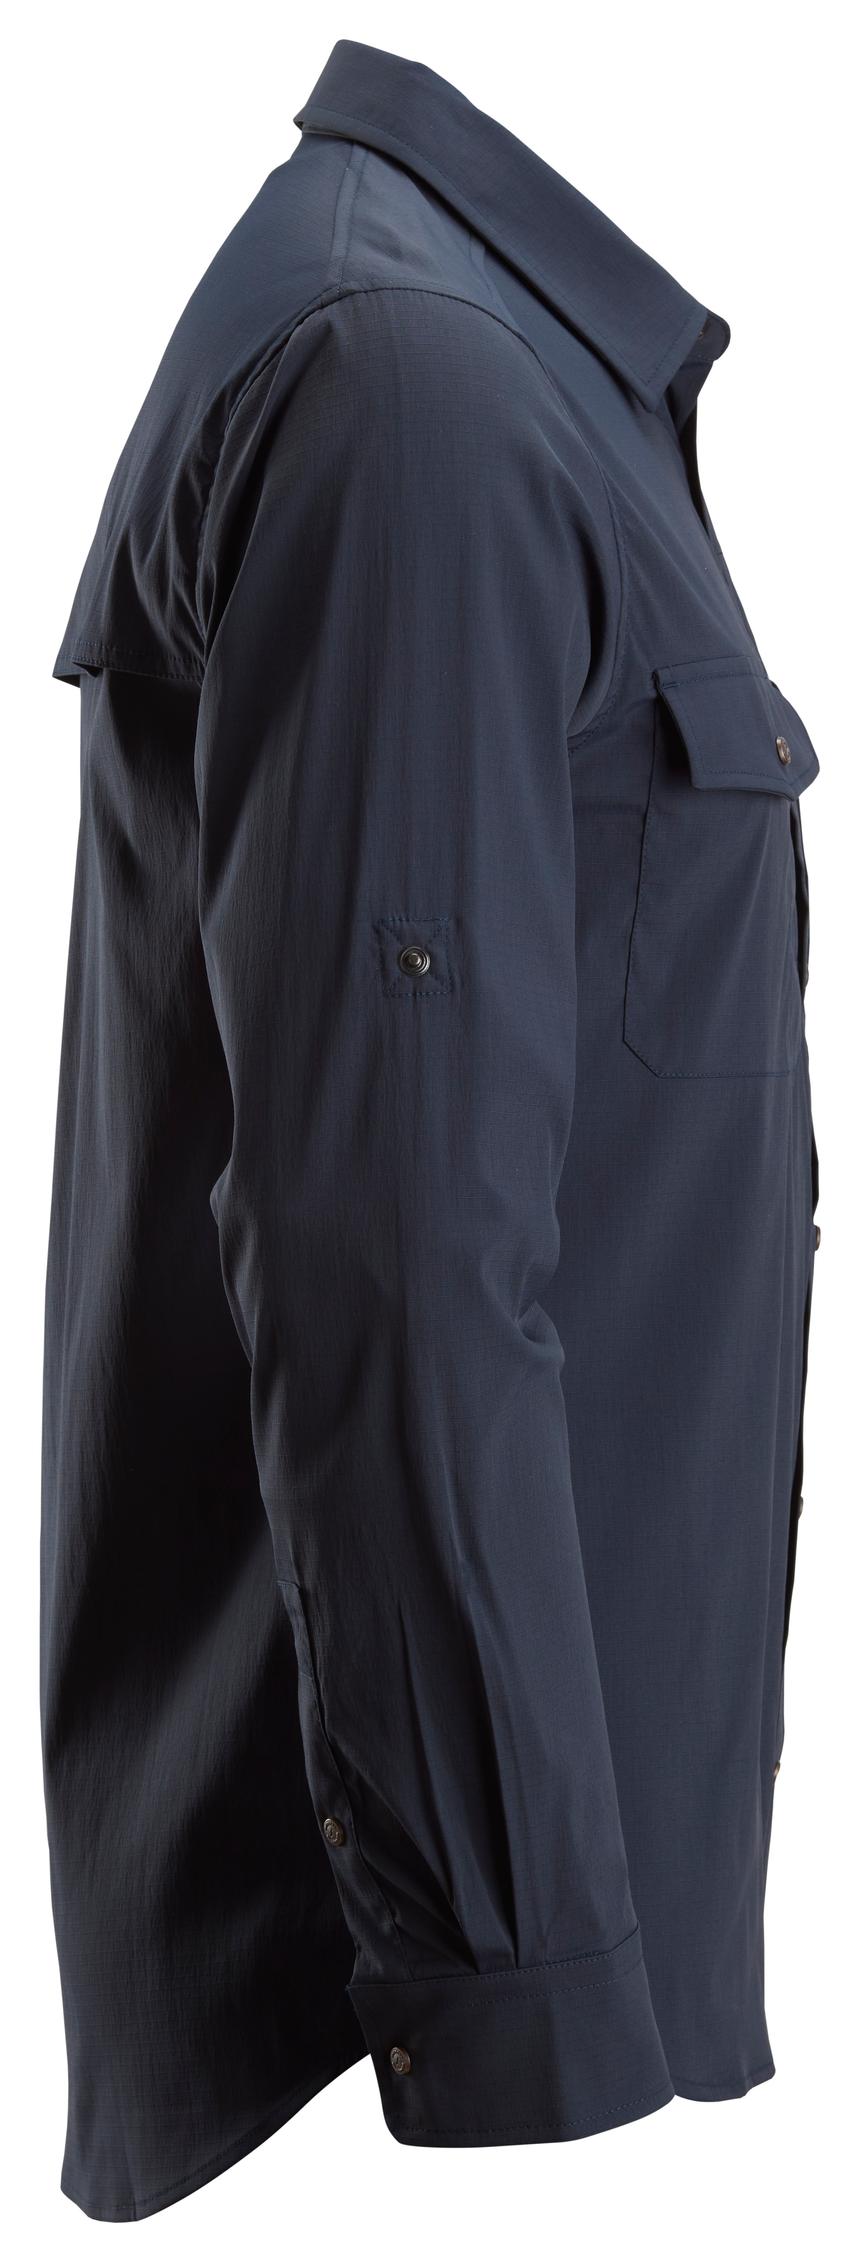 Snickers 8521 LiteWork Stretch Wicking Long Sleeve Shirt | Navy